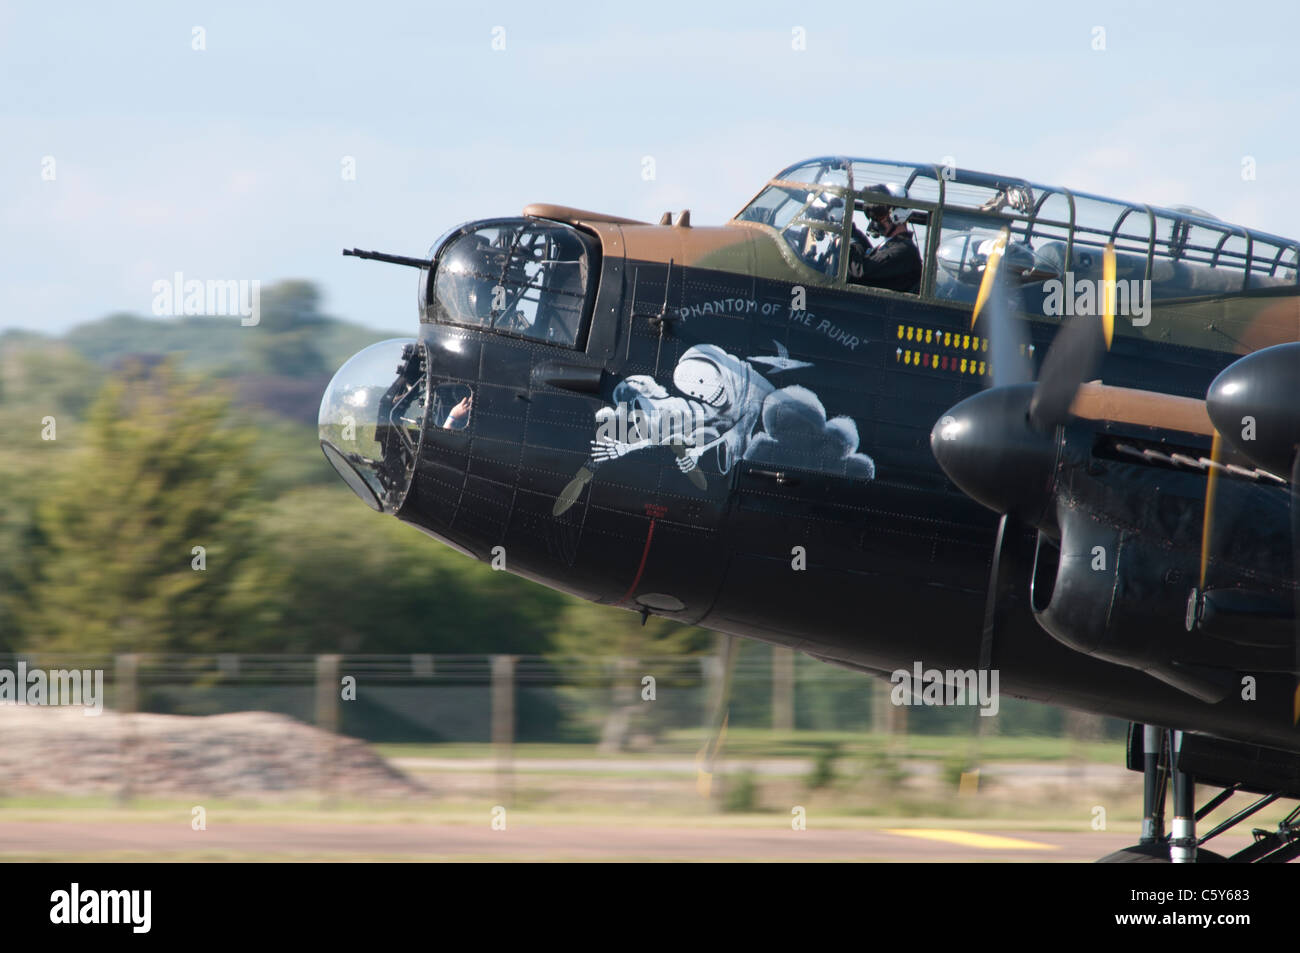 Battle of Britain Memorial Flight Lancaster ' The Phantom Of The Ruhr' taxis at the 2011 Royal International Air Tattoo. Stock Photo